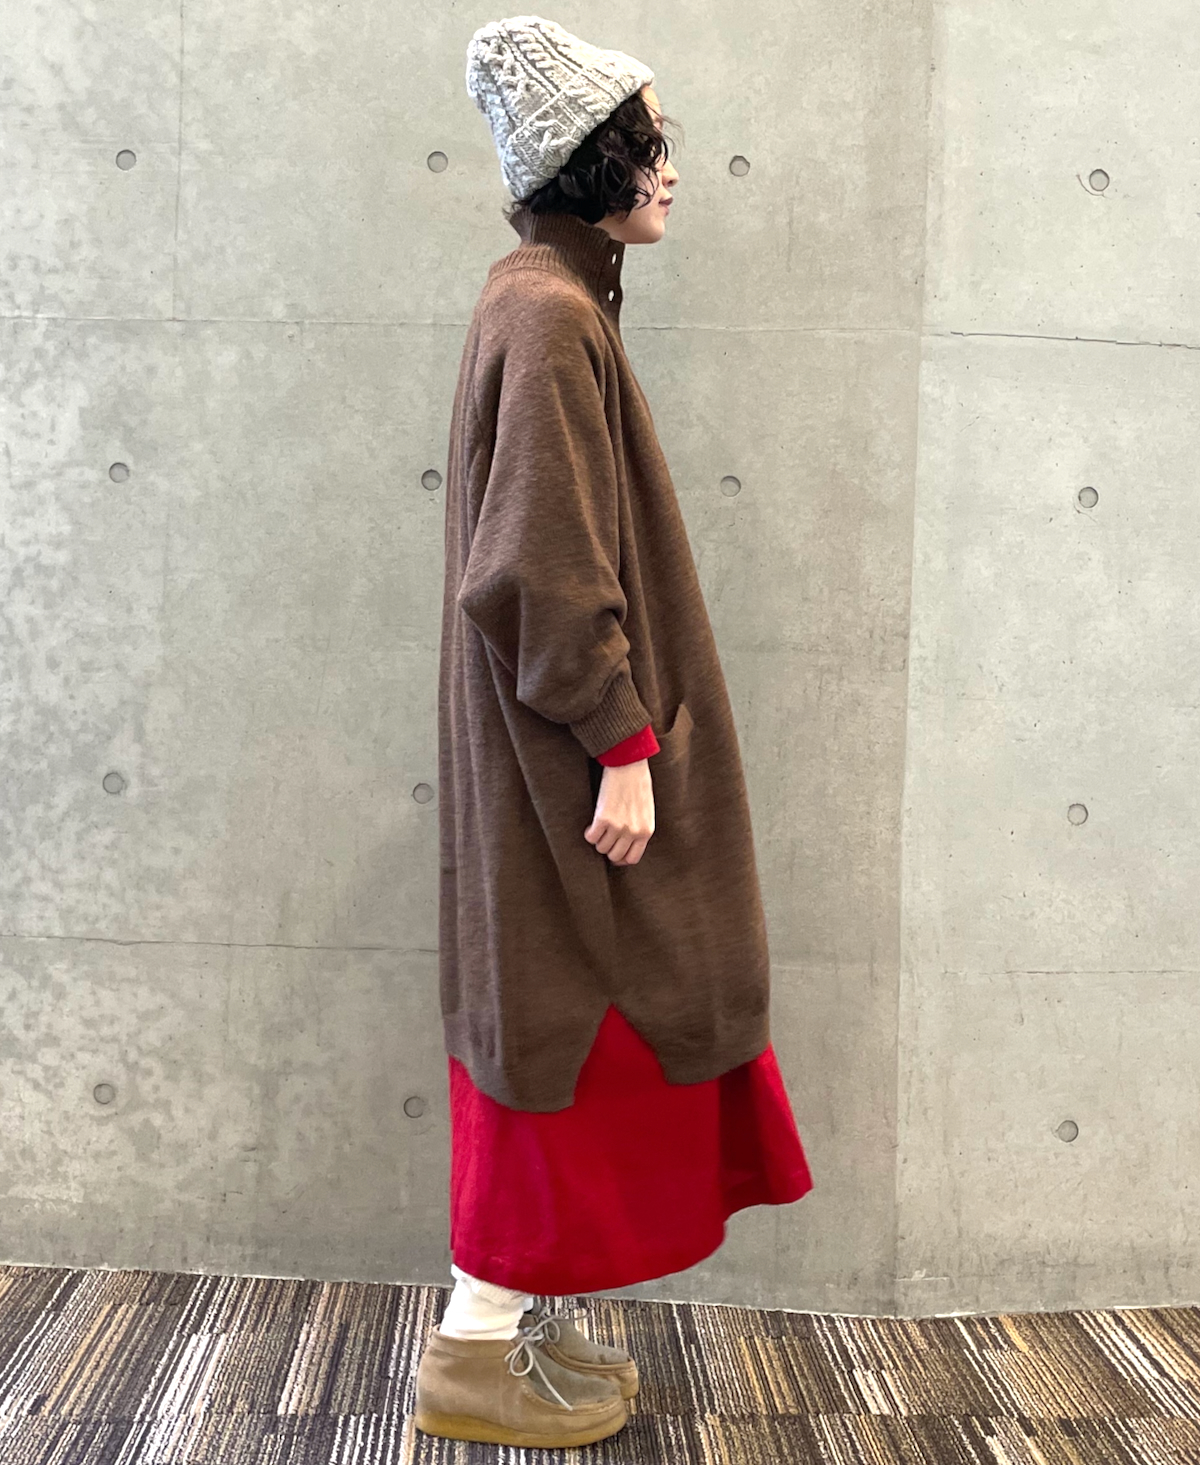 GNSL22703 (カーディガン) 5GG 2PLY COTOSWOLDS TURTLE NECK BUTTON LONG CARDIGAN